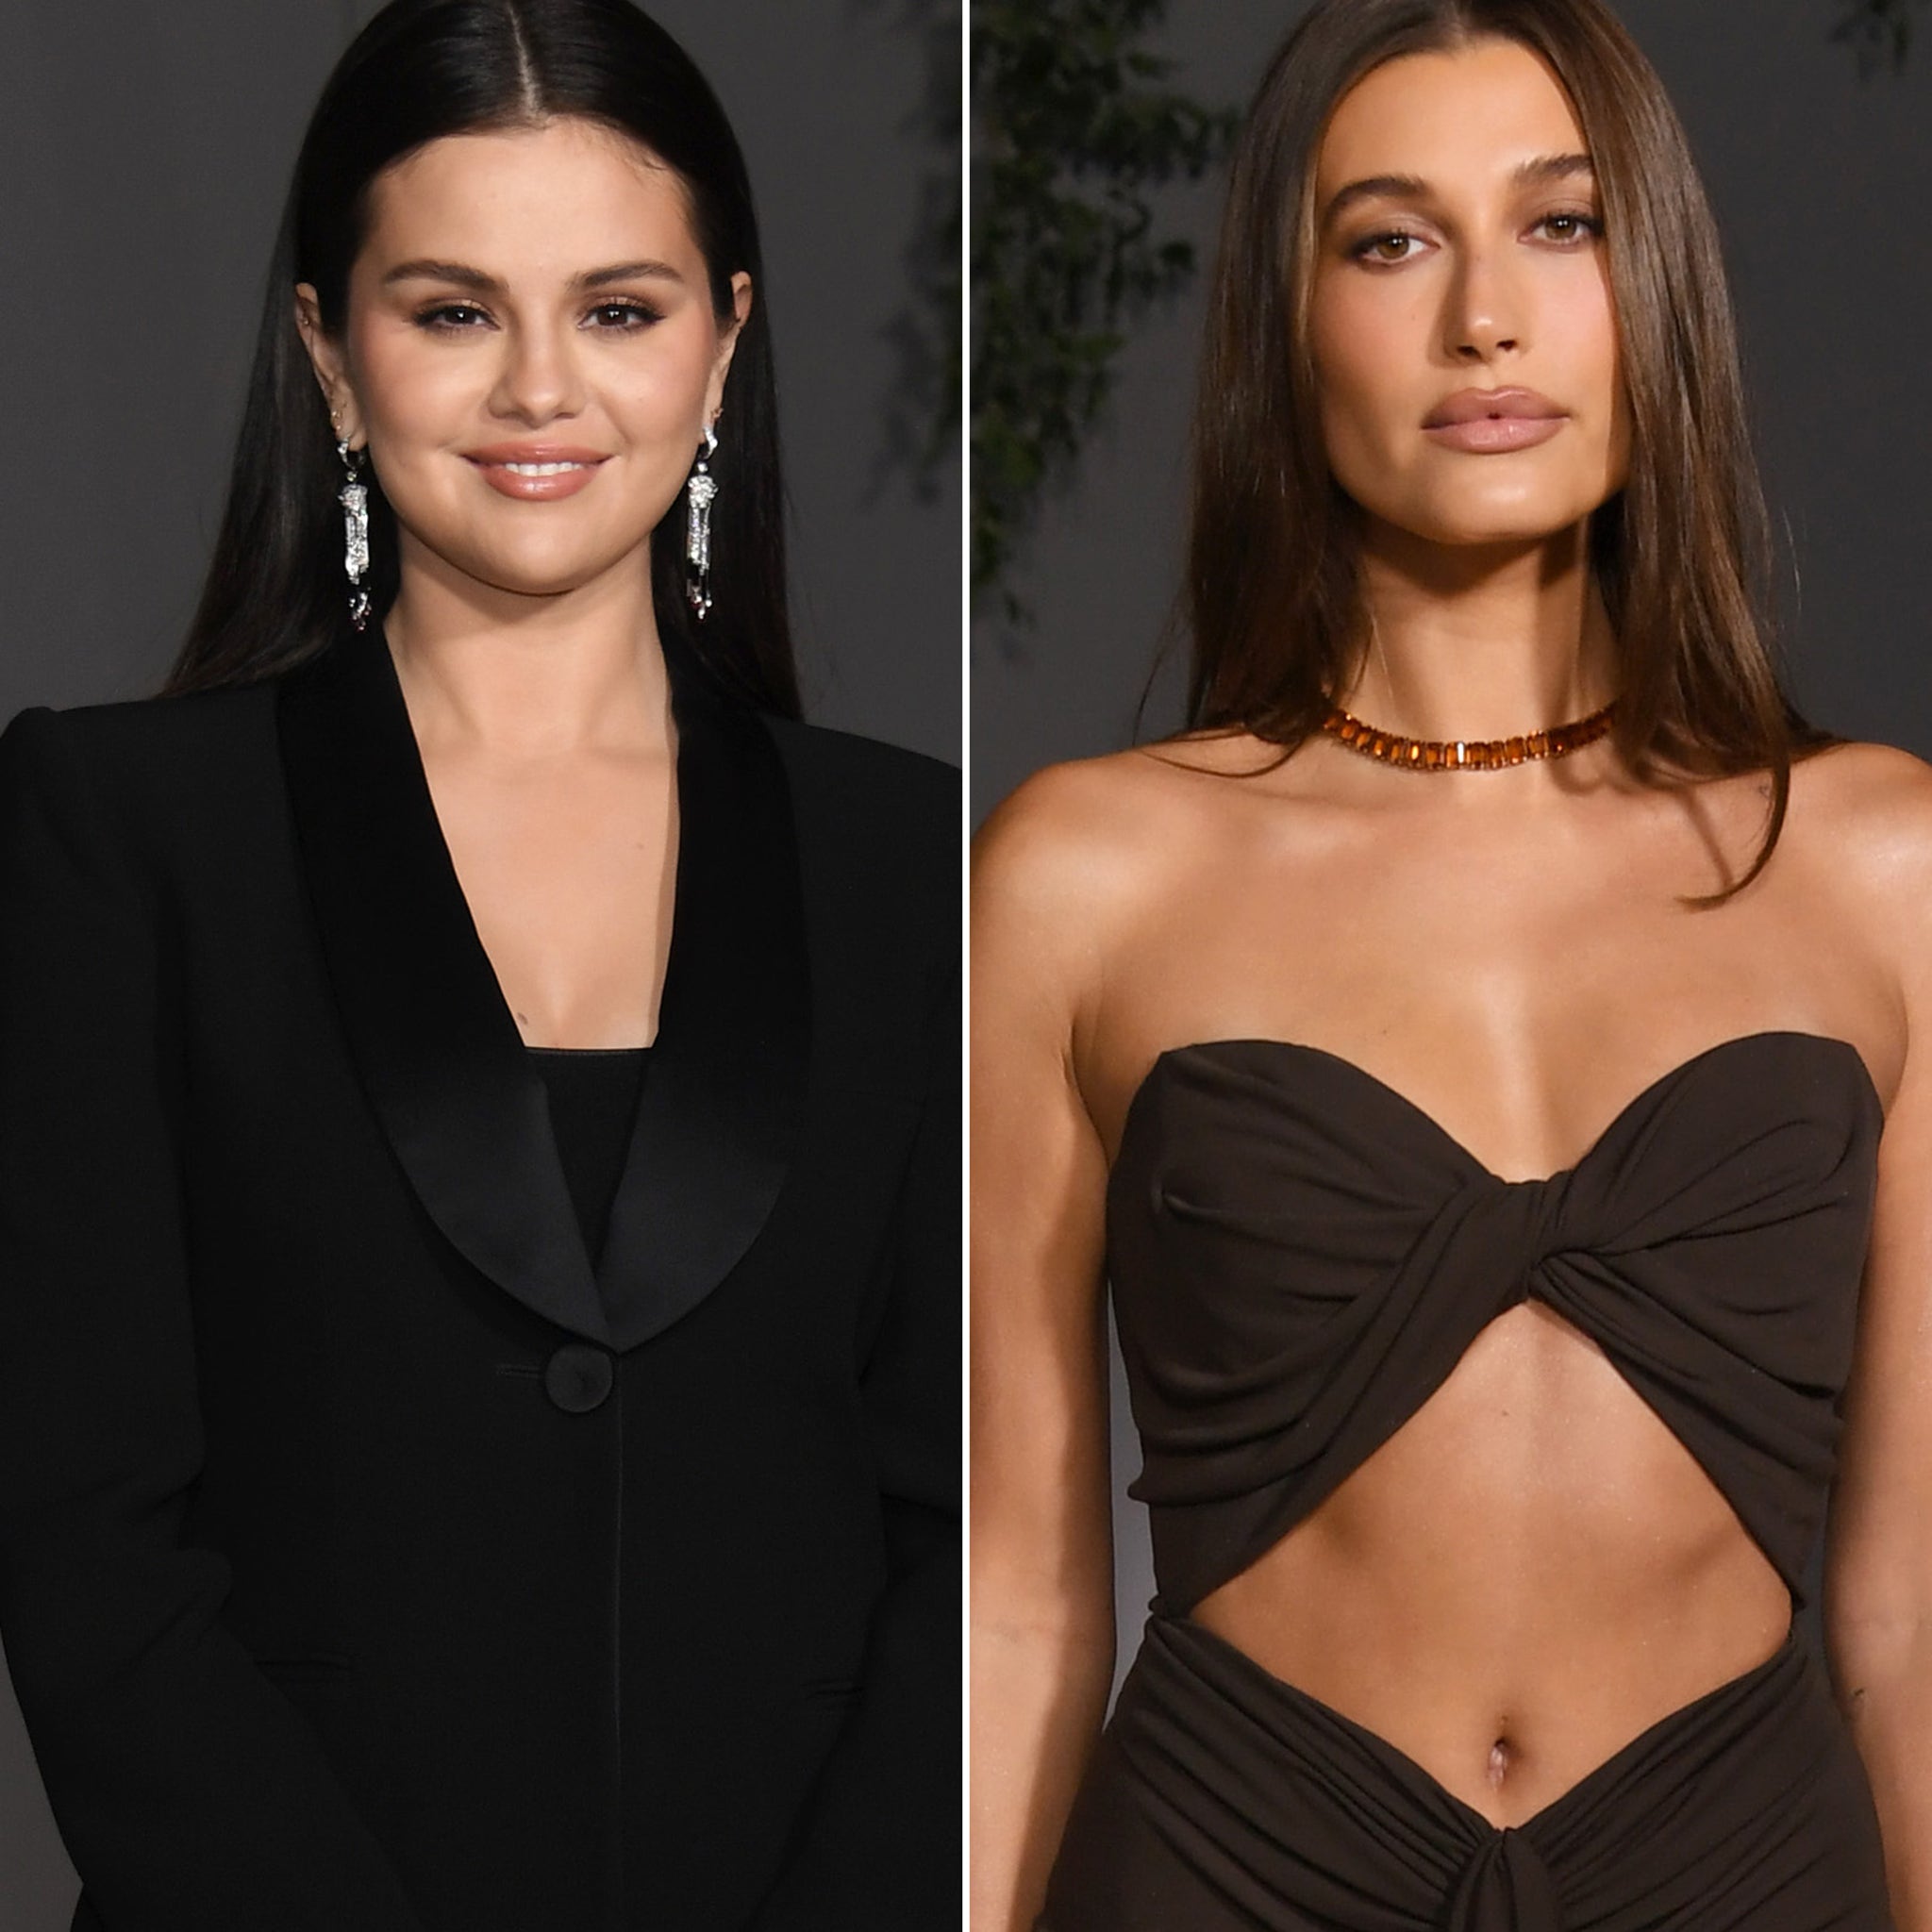 Selena Gomez and Hailey Bieber: A timeline of their history